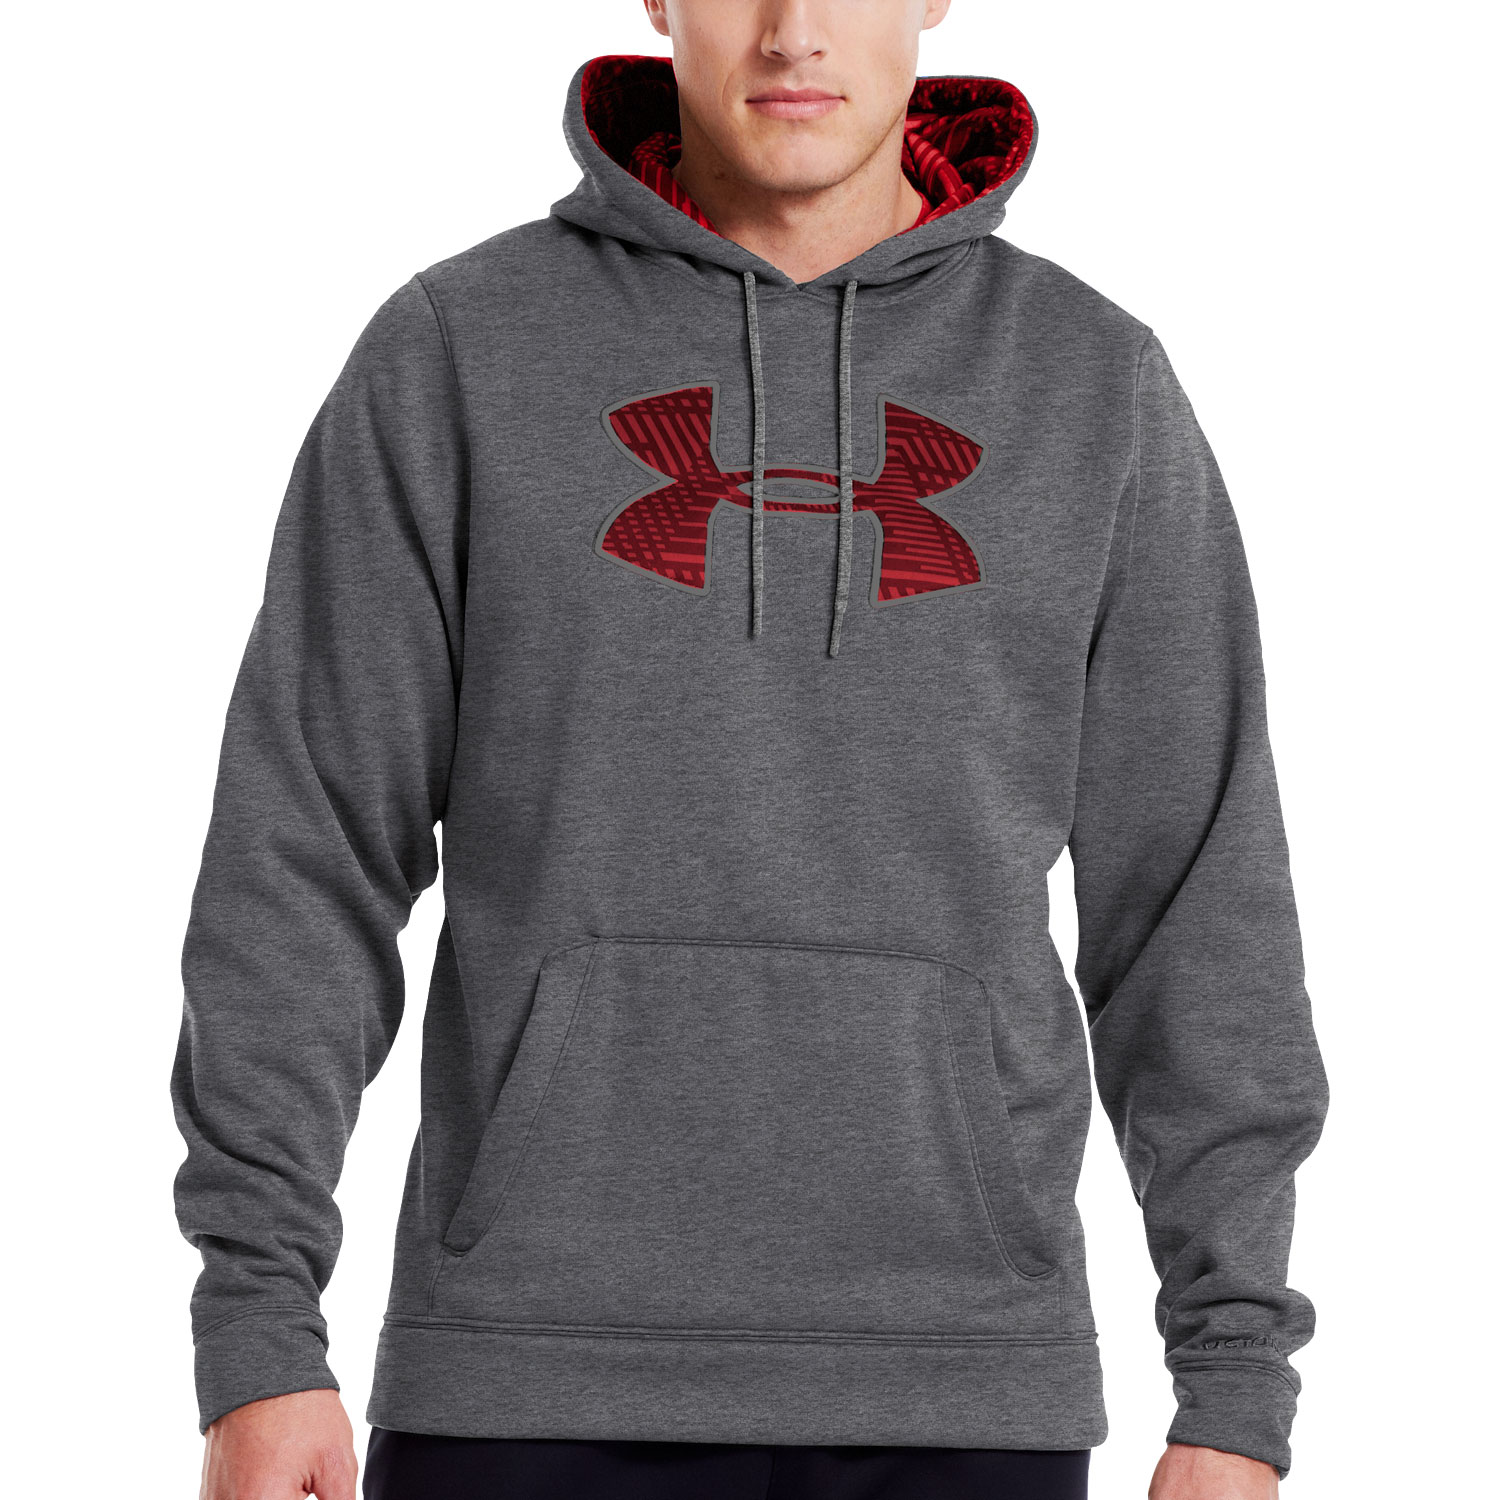 Cheap under armour sweater jacket Buy 